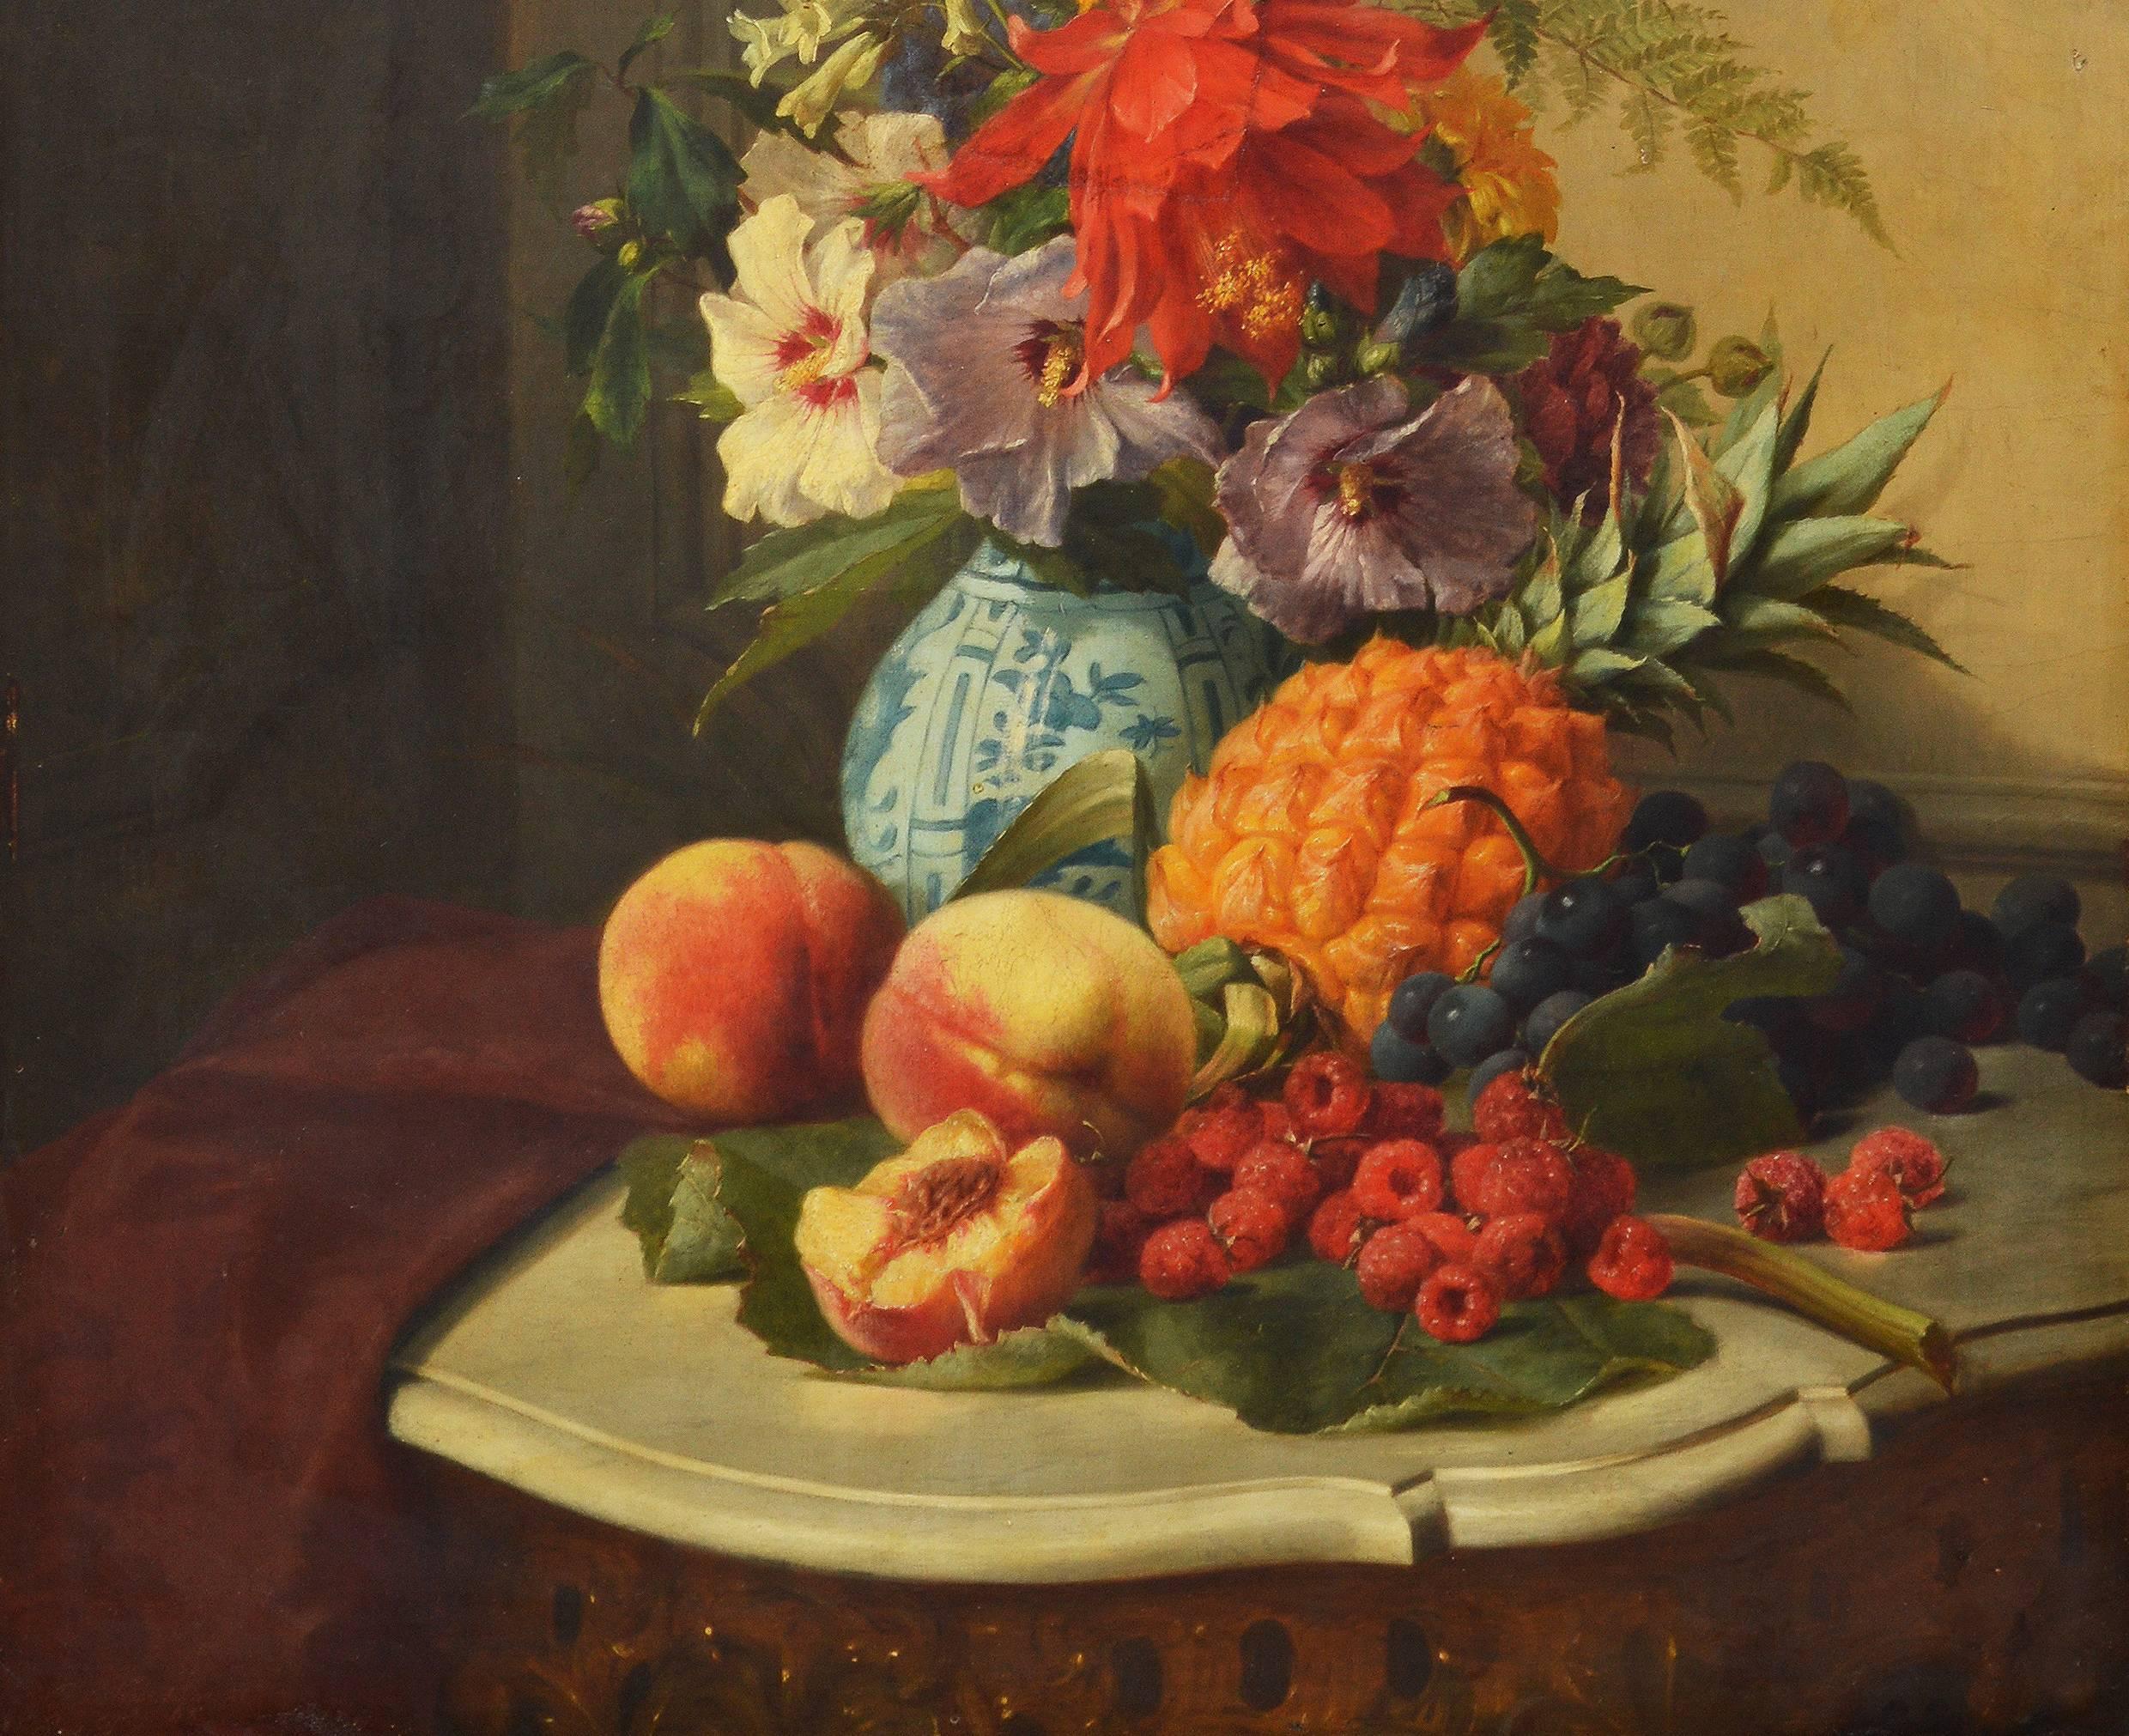 19th Century Still Life with Fruit - Brown Still-Life Painting by Unknown